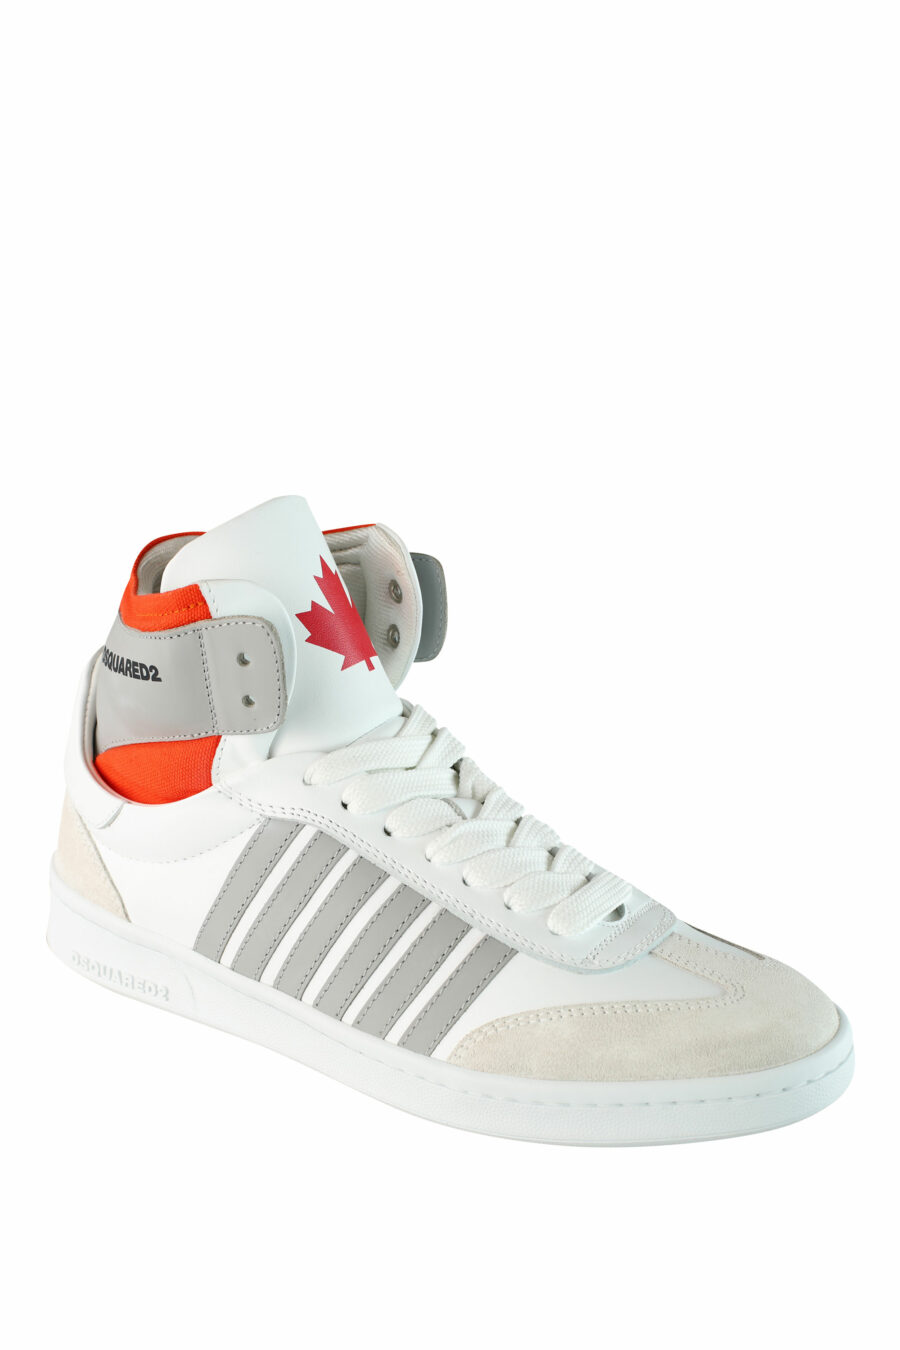 White mixed "boxer" bootie style trainers with orange and grey details - IMG 1502